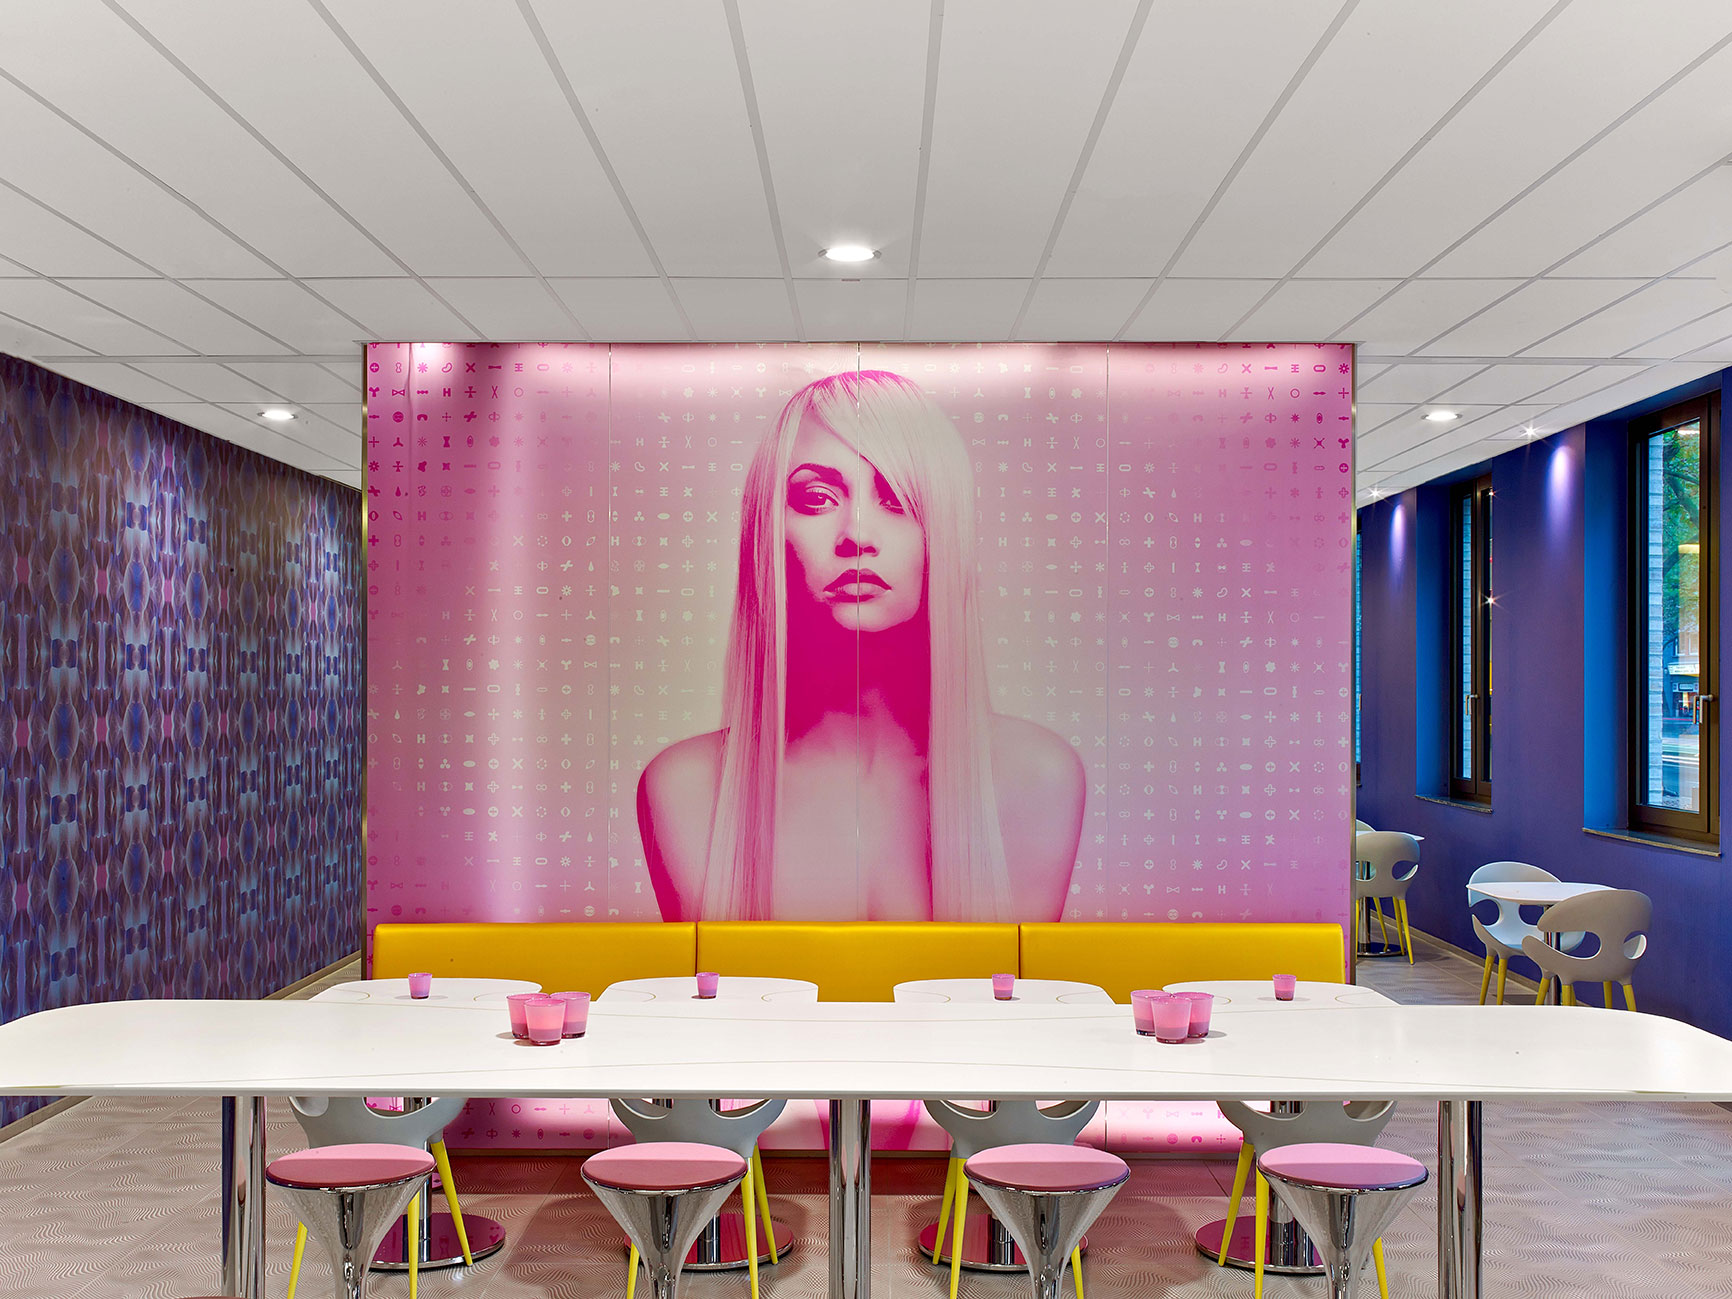 Breakfast room with a design photo of a young model